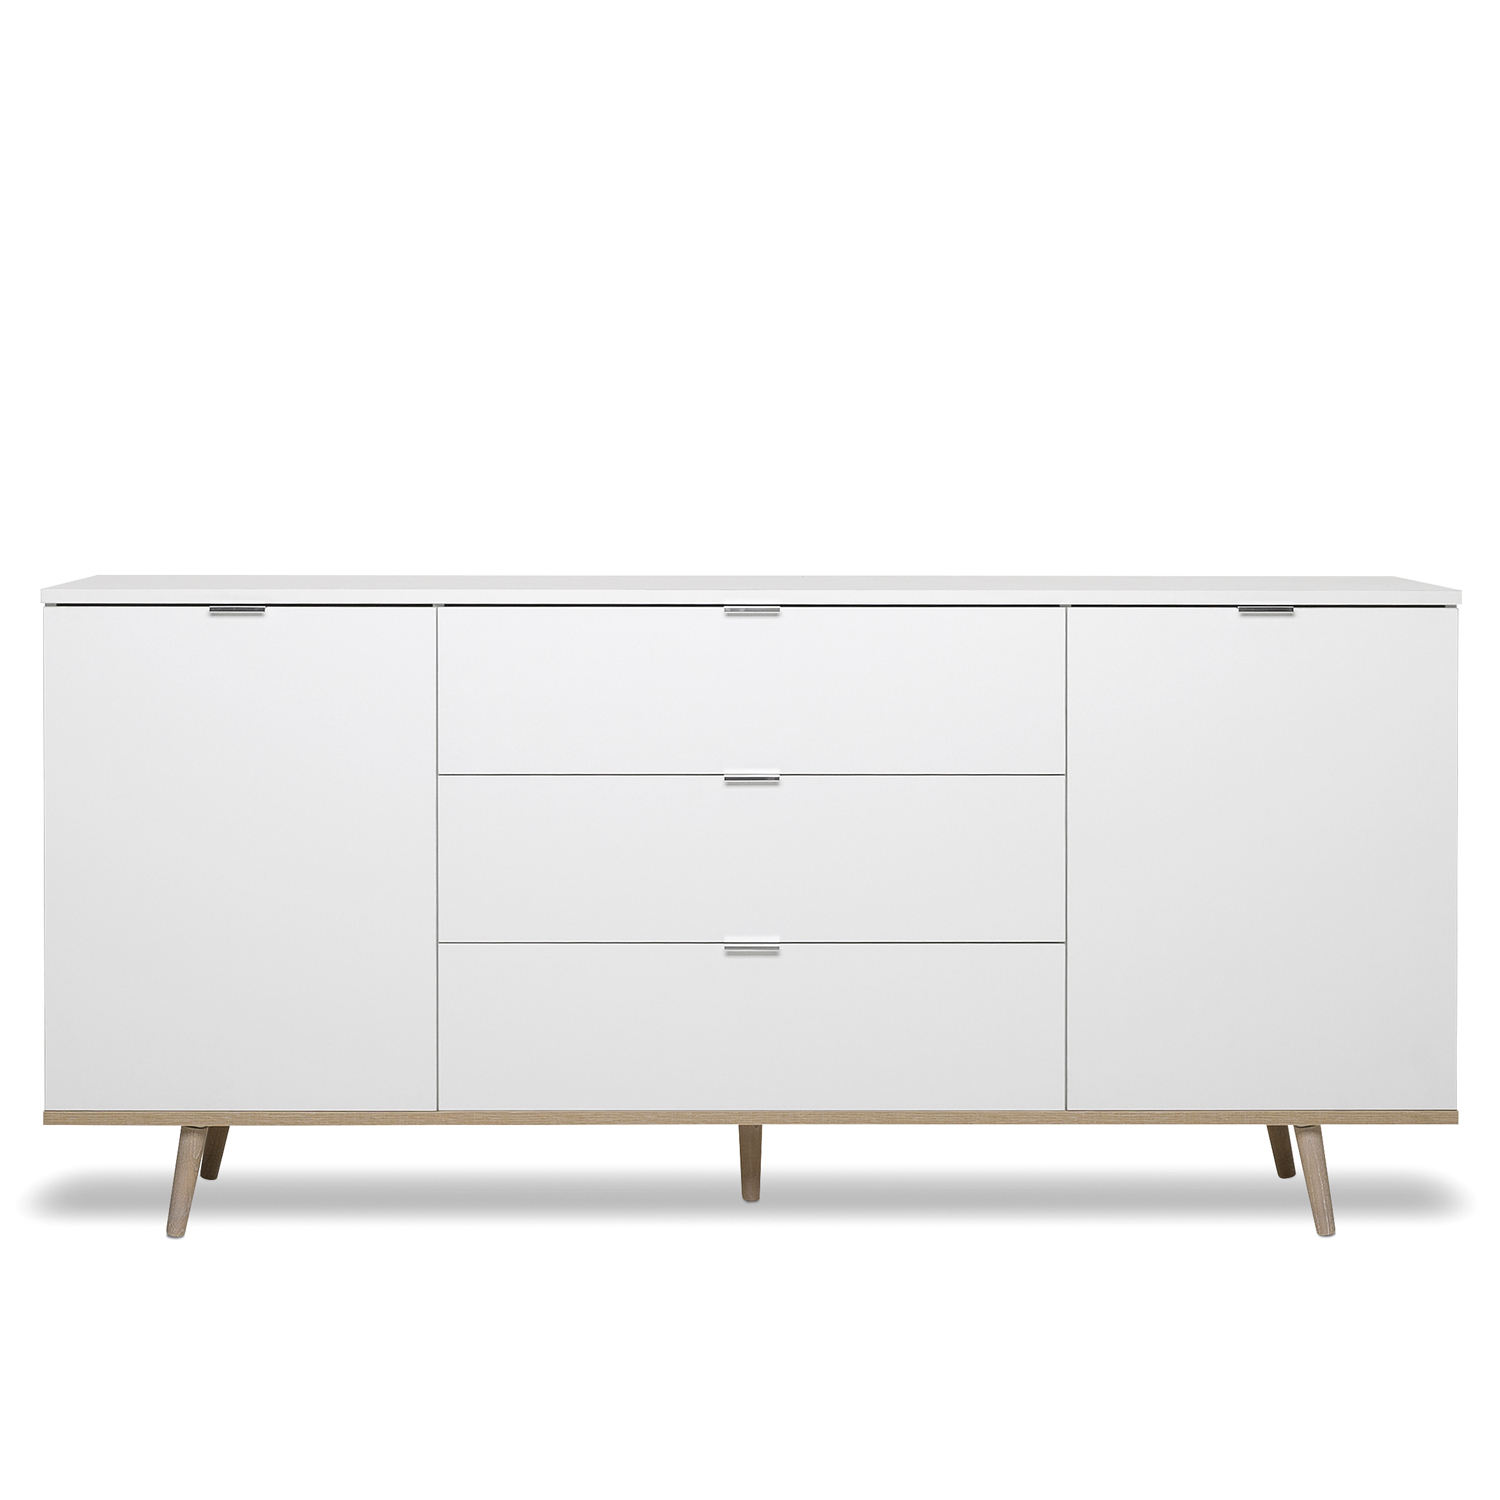 Sideboard Commode White Wood with drawers Living room cabinet